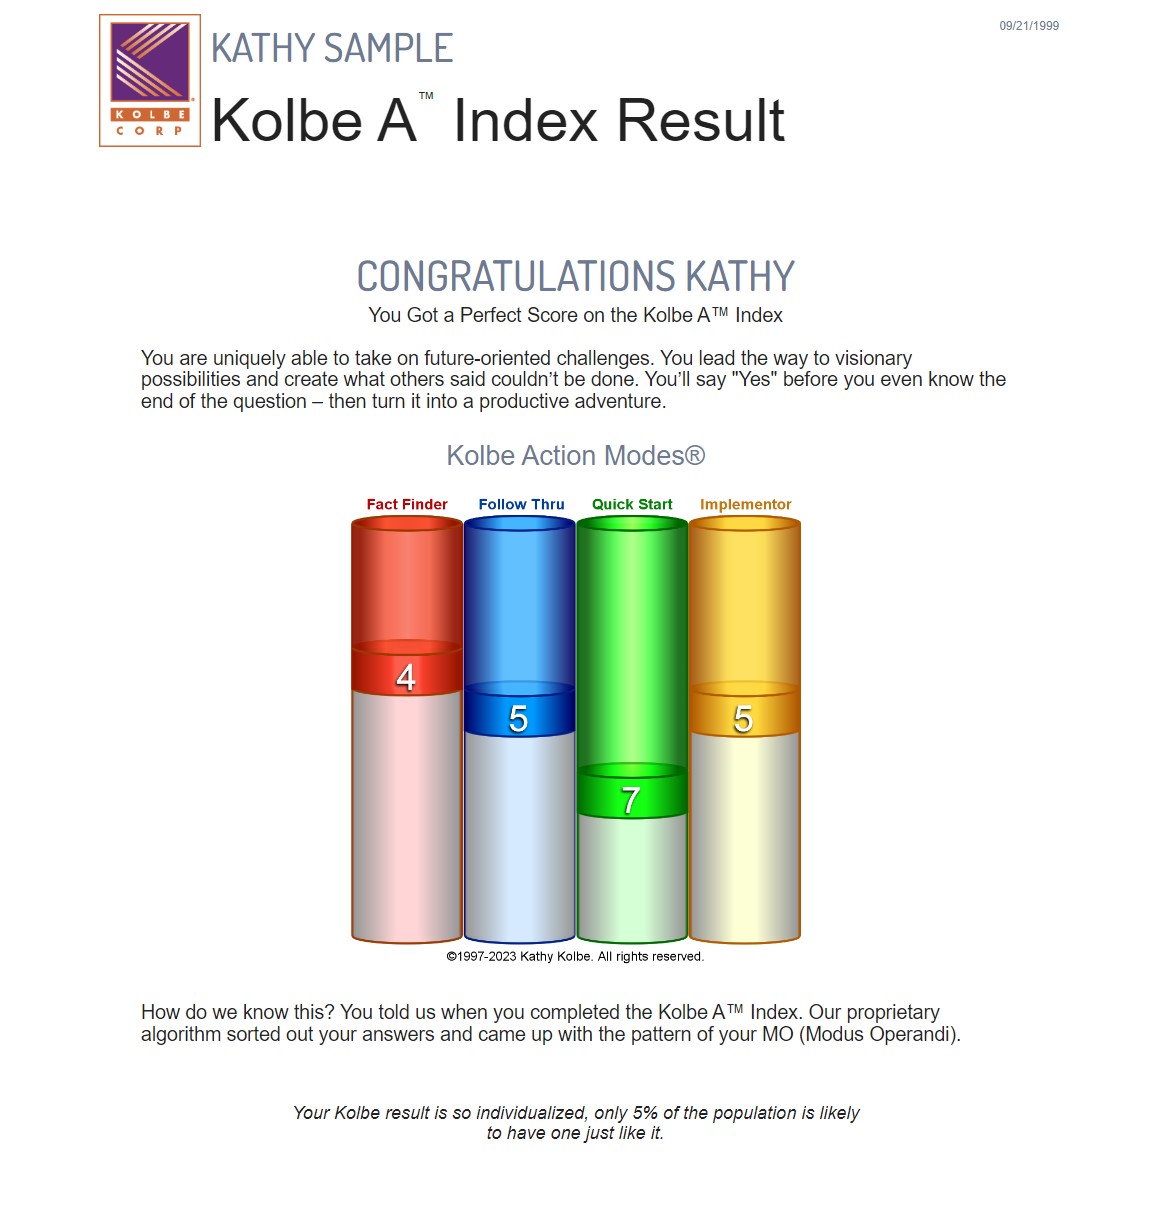 Kolbe Indexes result